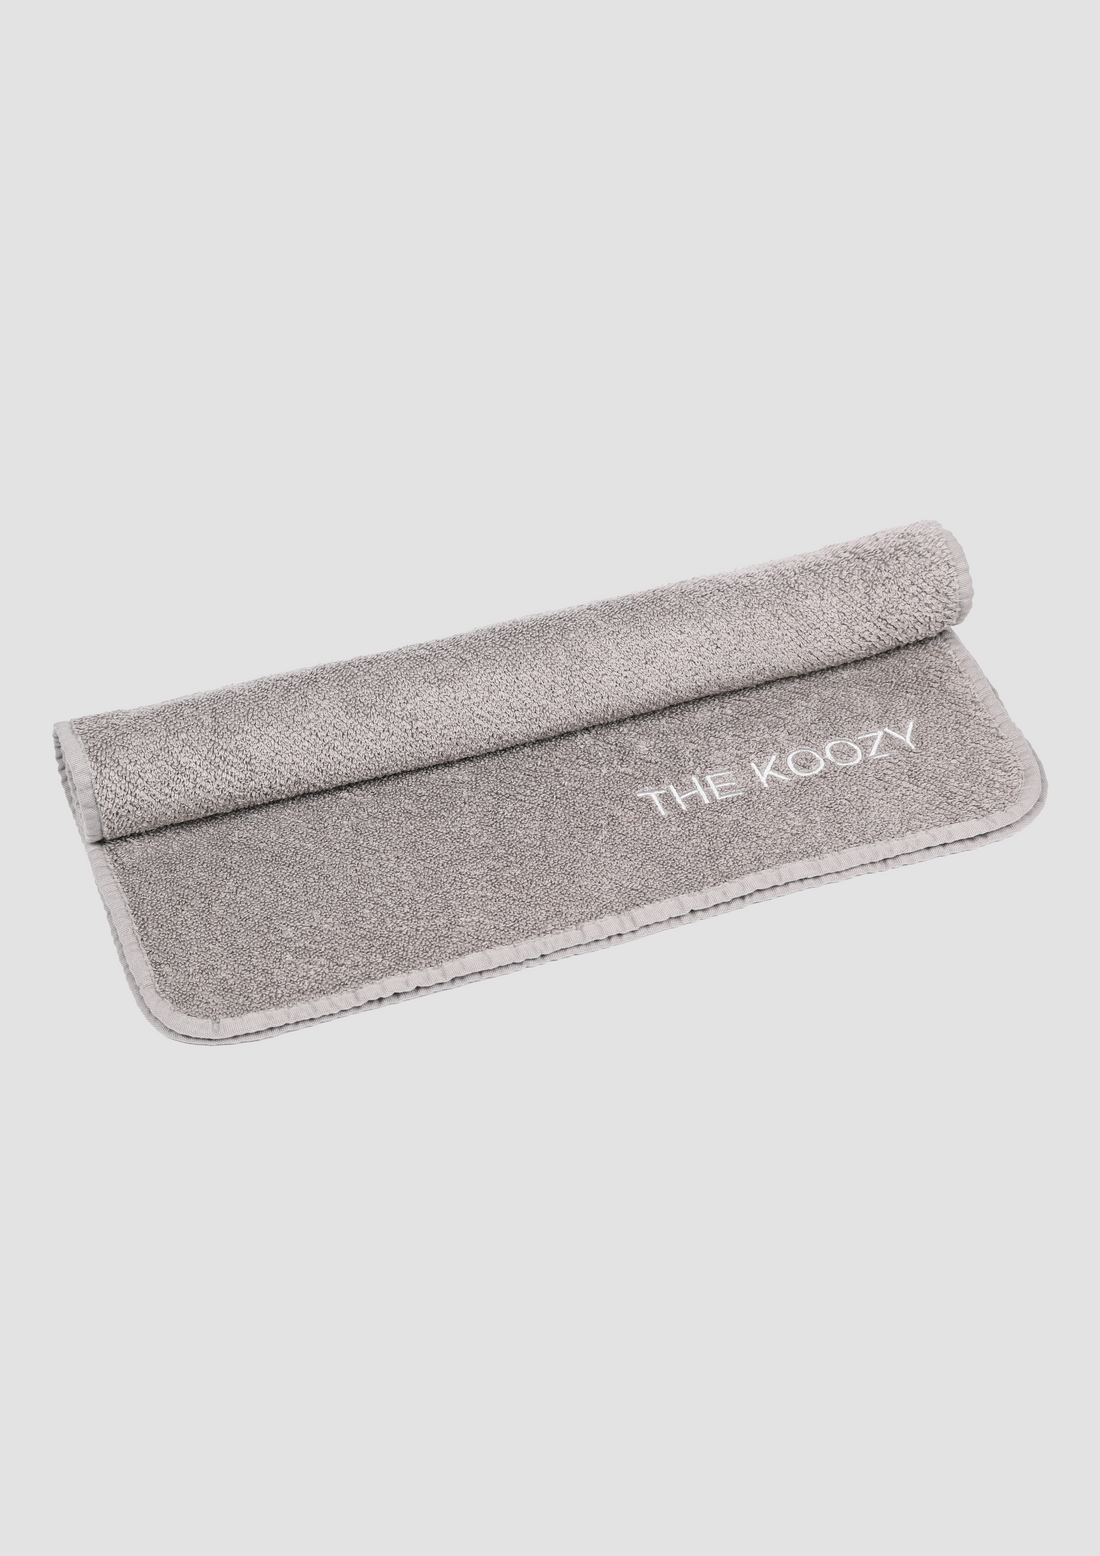 Pluto Gym Towel in GIZA Egyptian Cotton in Gray